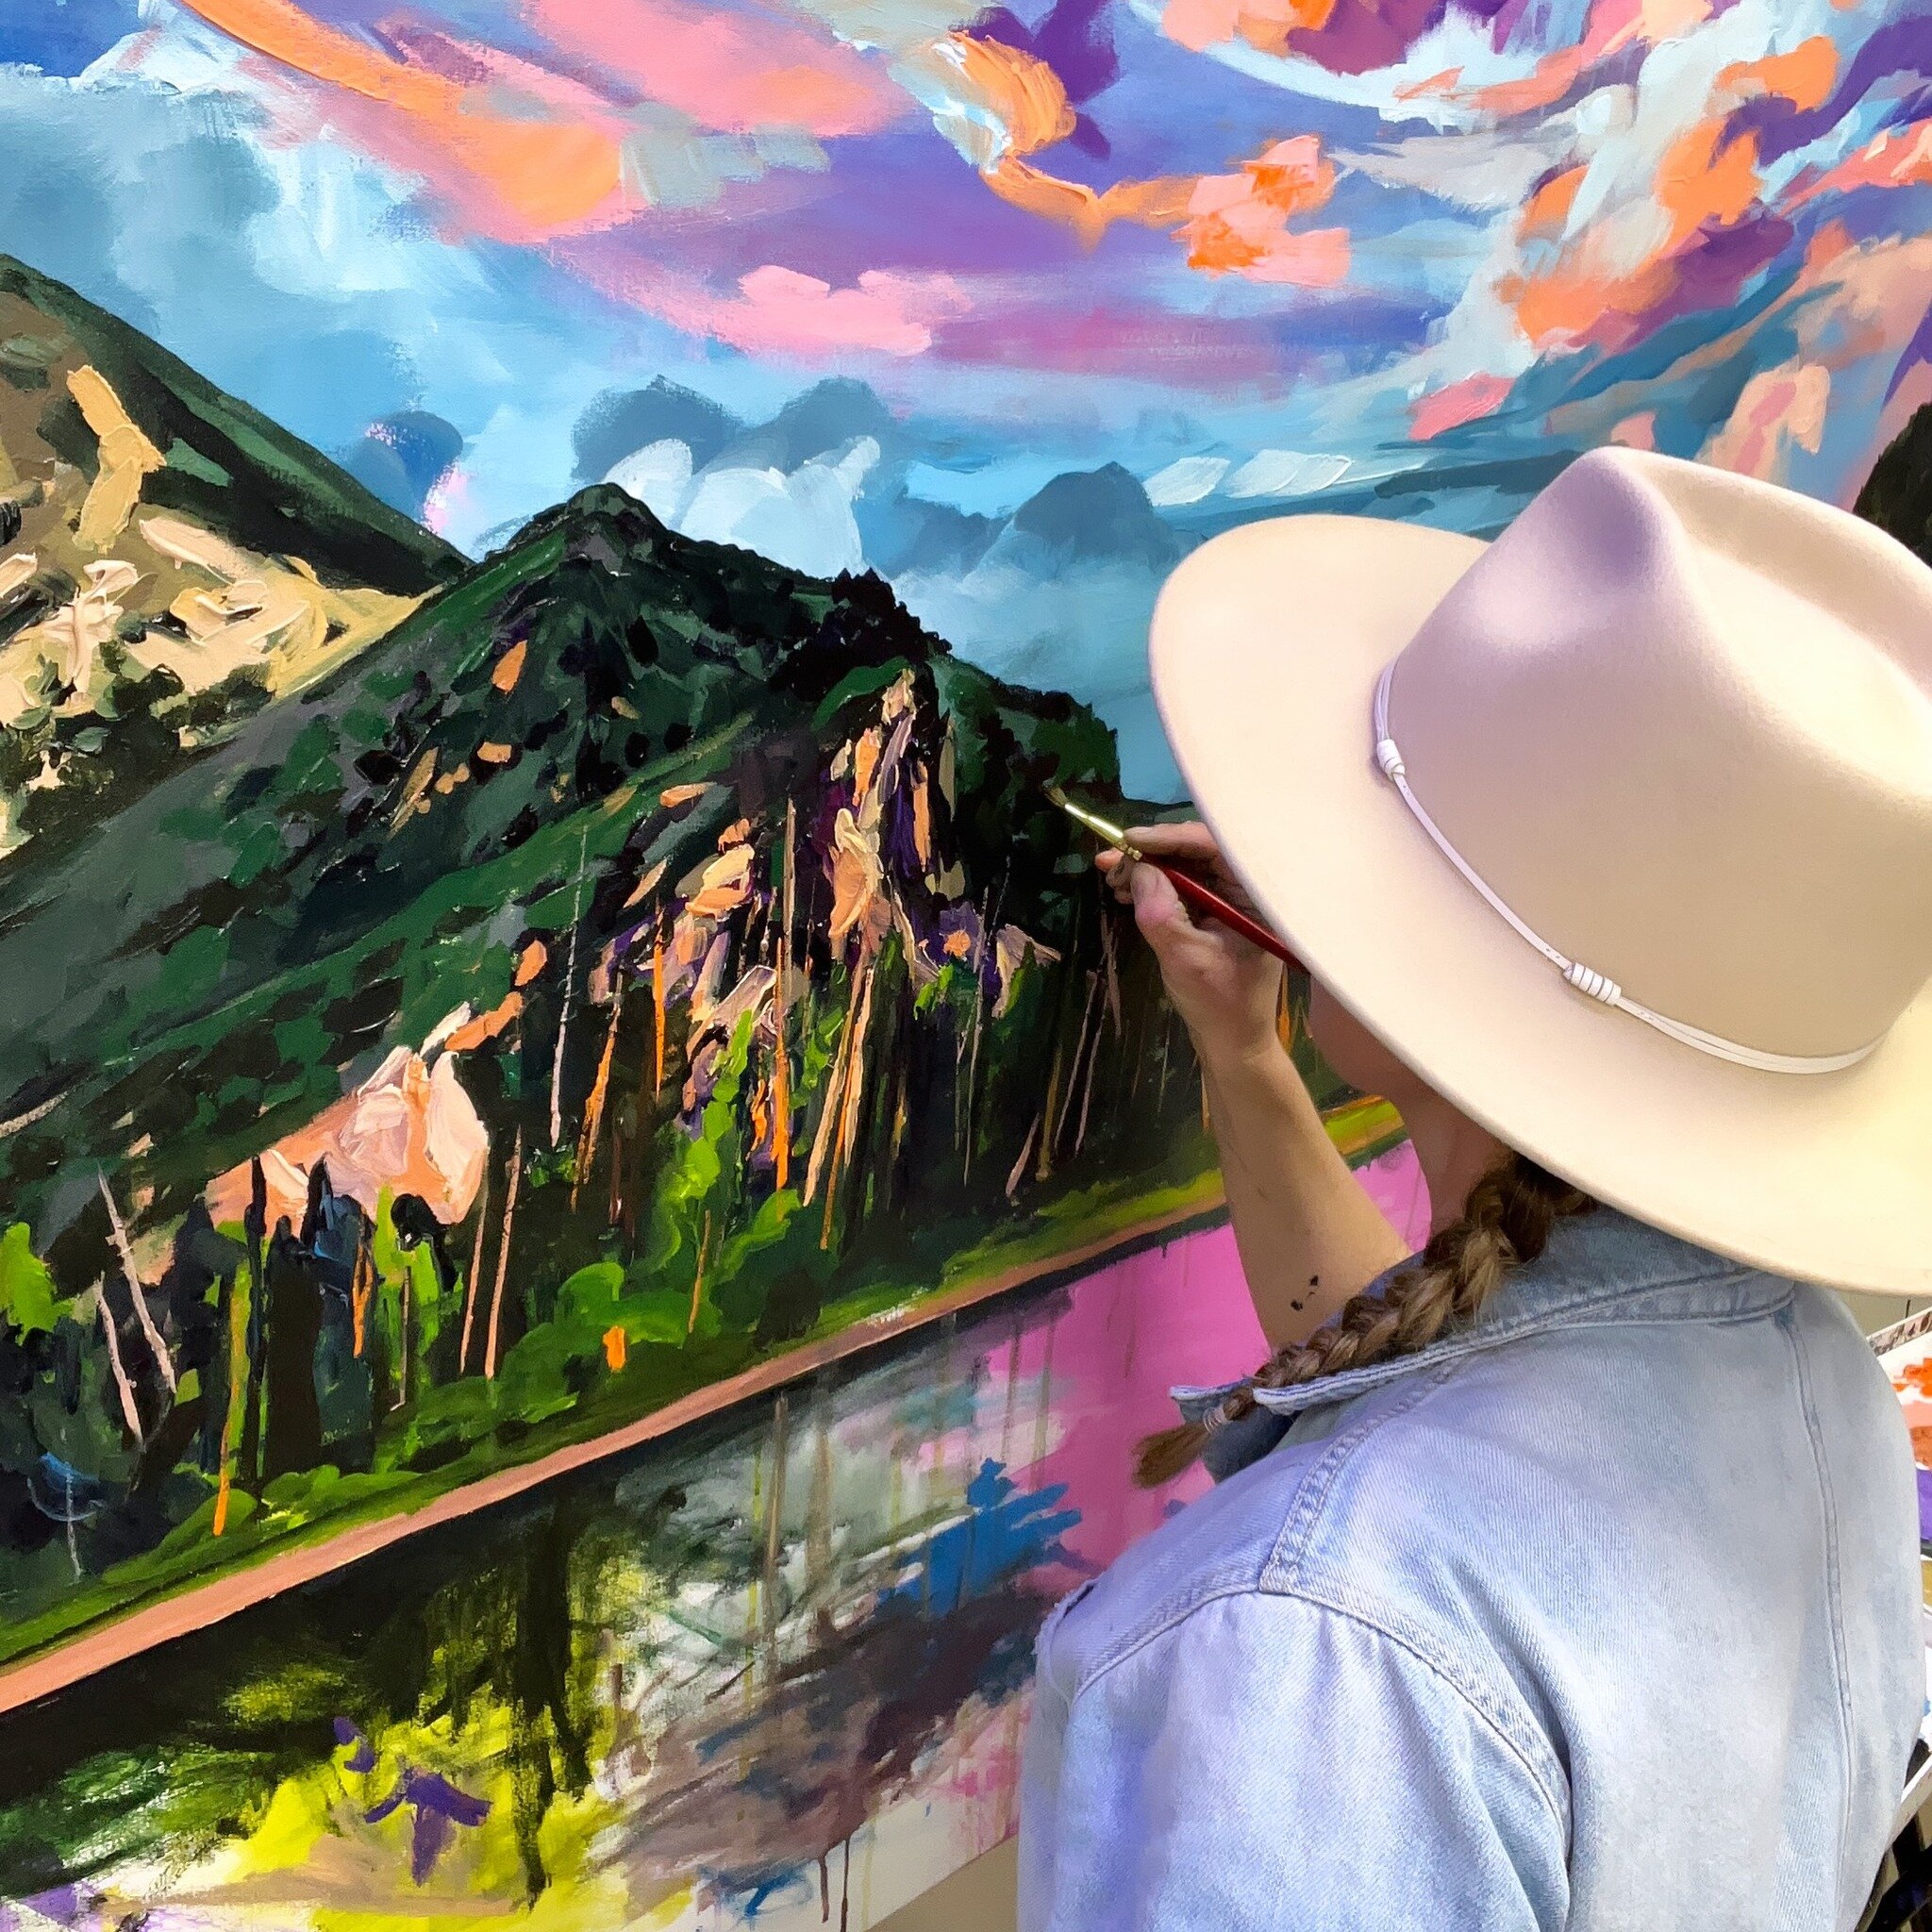 New Lake Dillion Reservoir painting in progress 👀 I&rsquo;ve been having an absolute blast with this one. This Summit County gem is so beautiful and I&rsquo;ve been dying to capture it for years. I&rsquo;ve had so many great memories in these waters